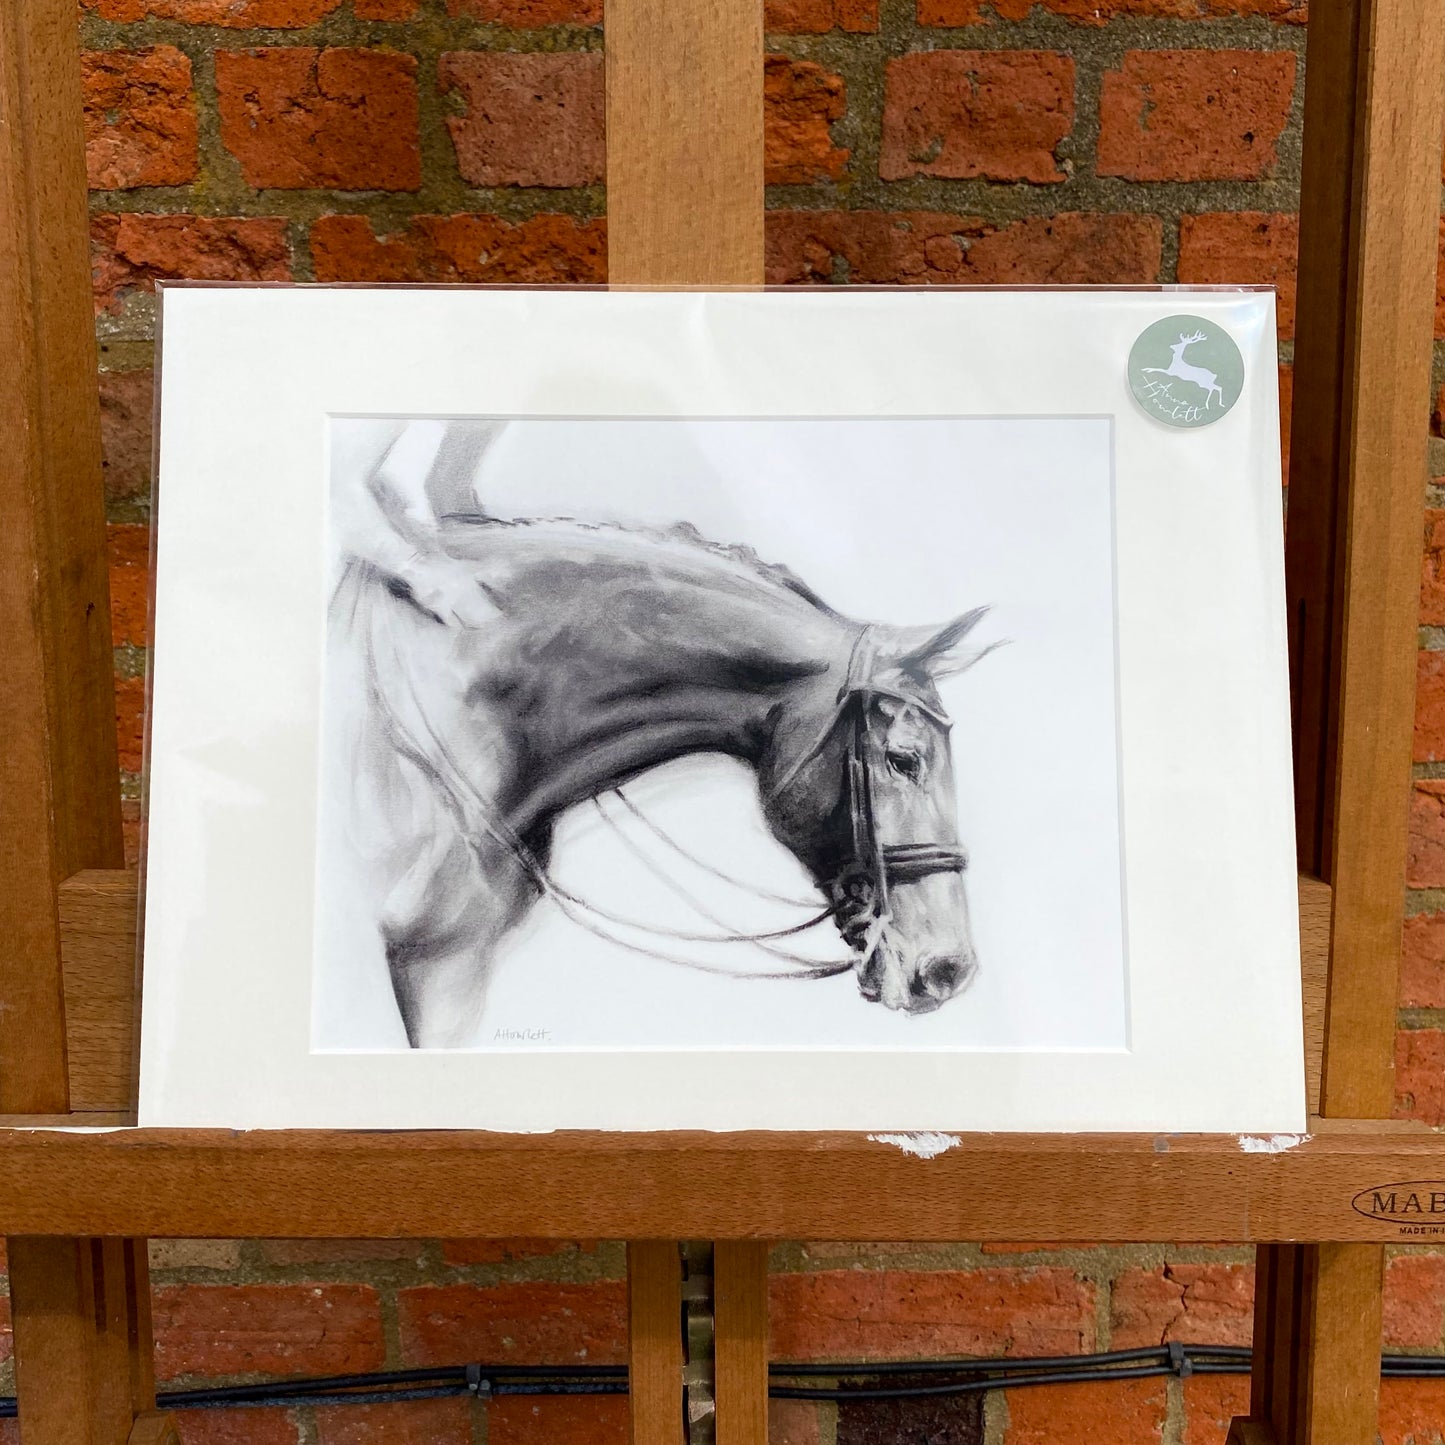 The Long Rein (Charcoal Study)